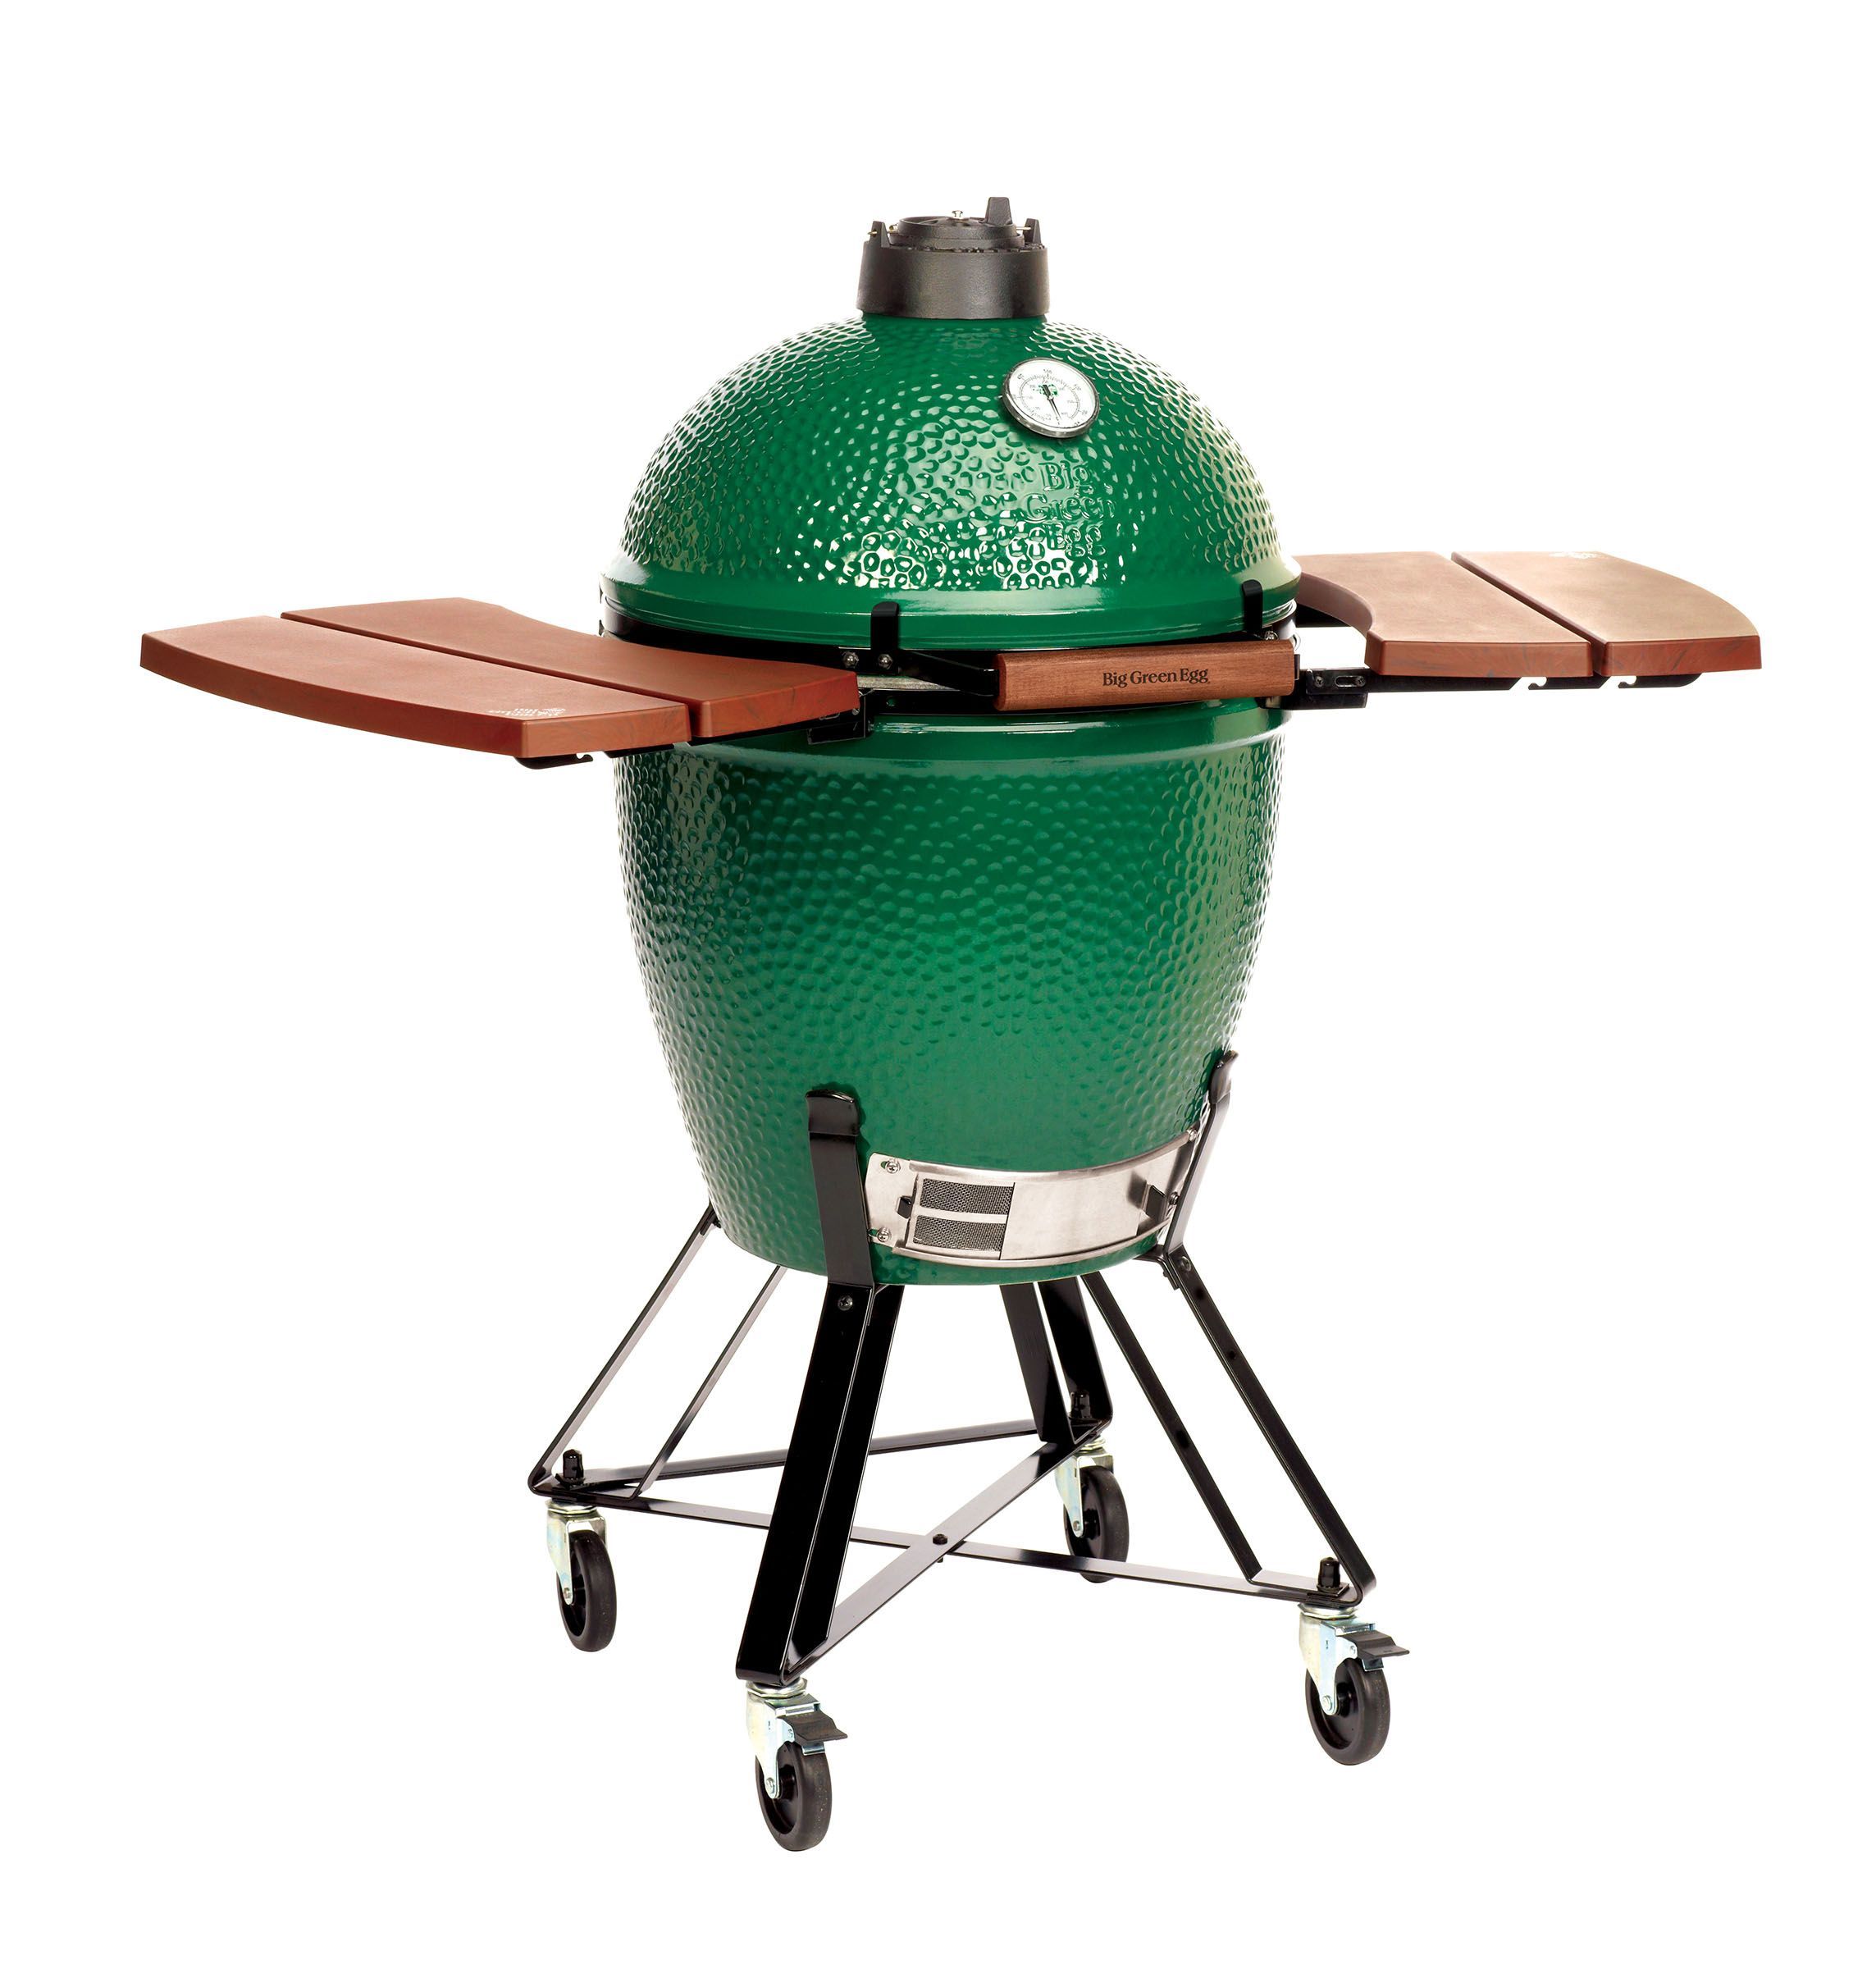 Big Green Egg ceramic cookers are versatile. Use as a grill, smoker or oven.